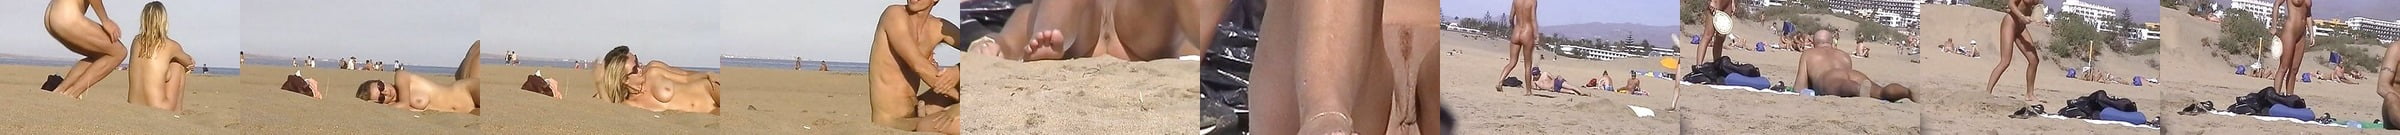 On The Beach Canary Islands 18 Pics Xhamster